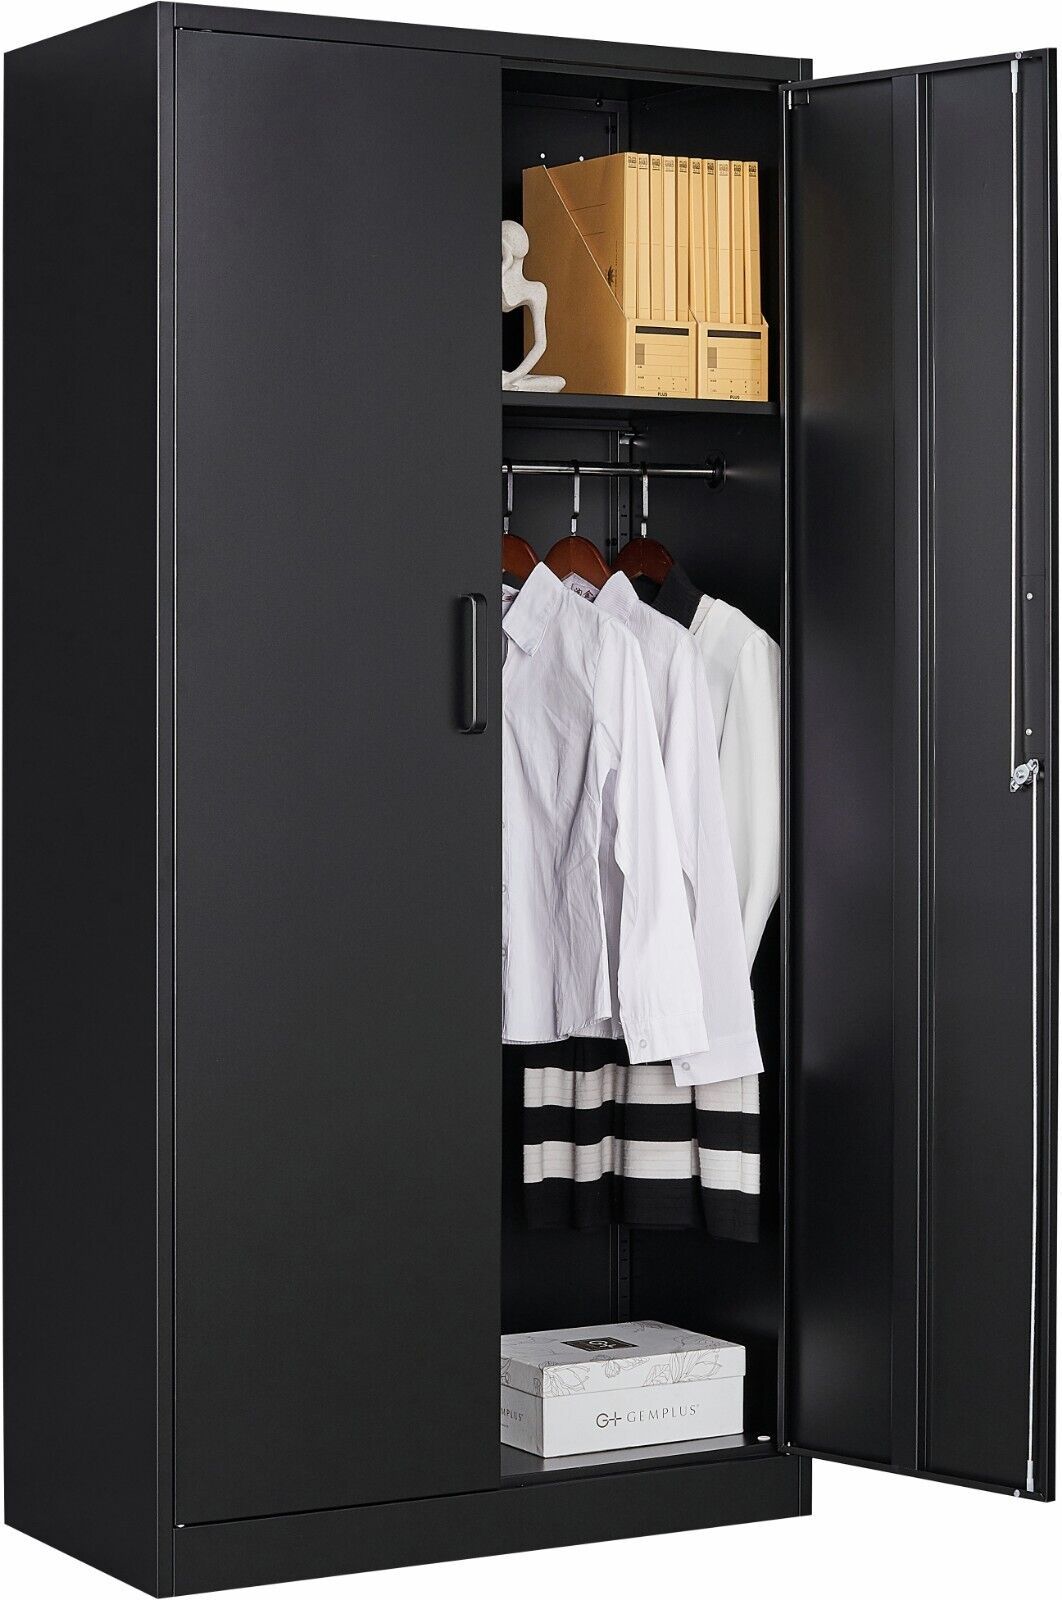 72” Tall Steel Wardrobe Storage Closet Cabinet Clothes Organizer For  Bedroom | Ebay Throughout Metal Wardrobes (Photo 3 of 15)